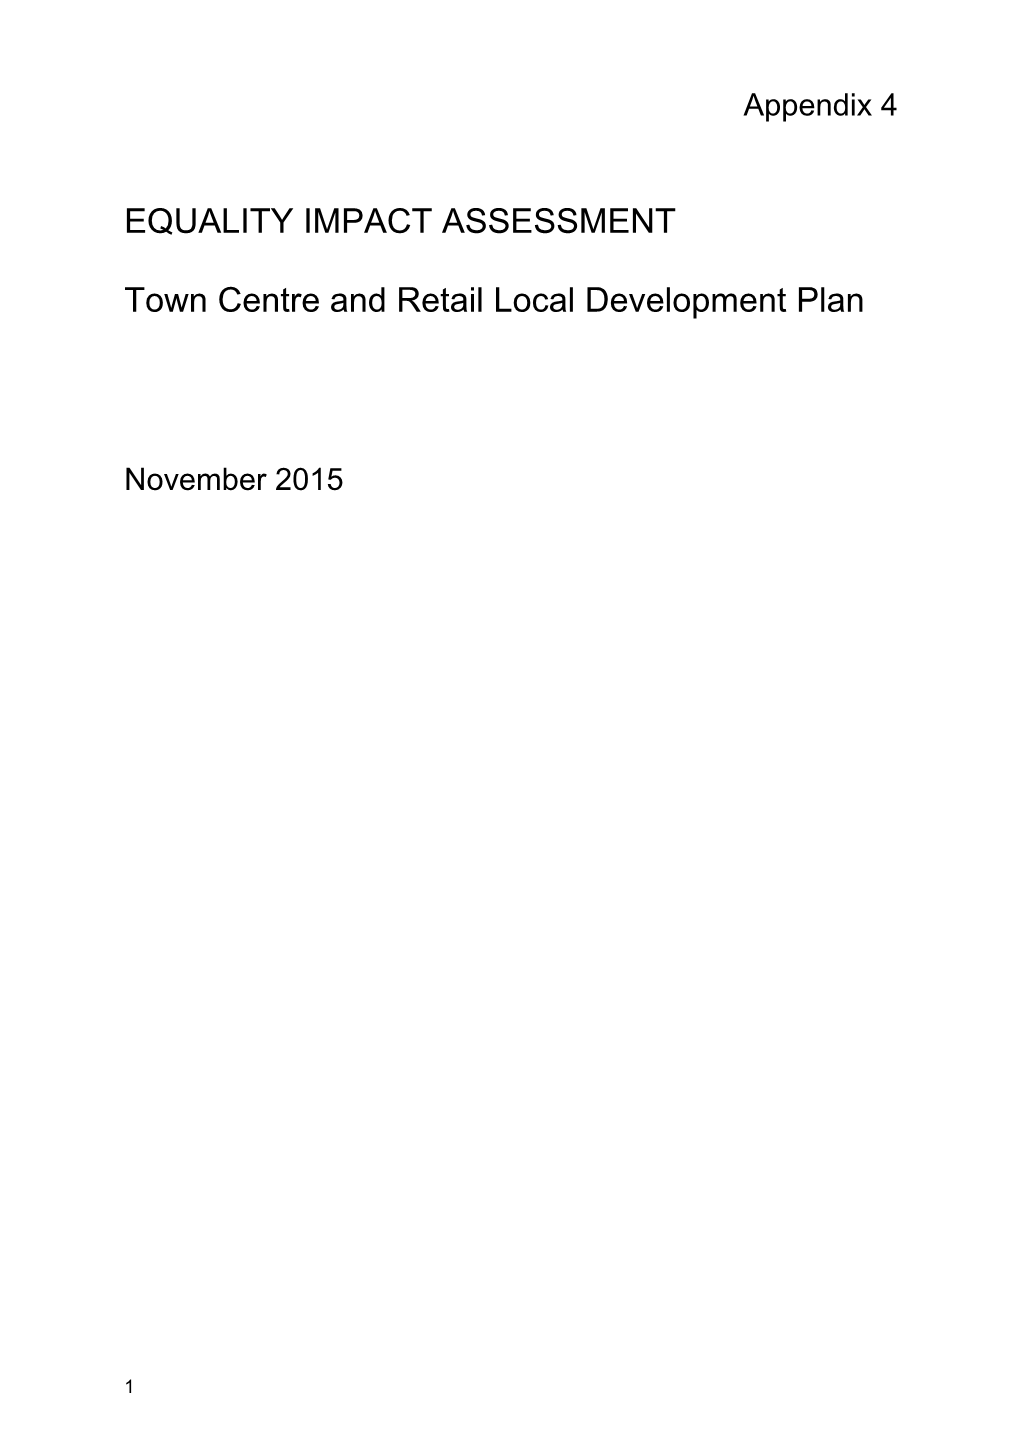 Town Centre and Retail Local Development Plan